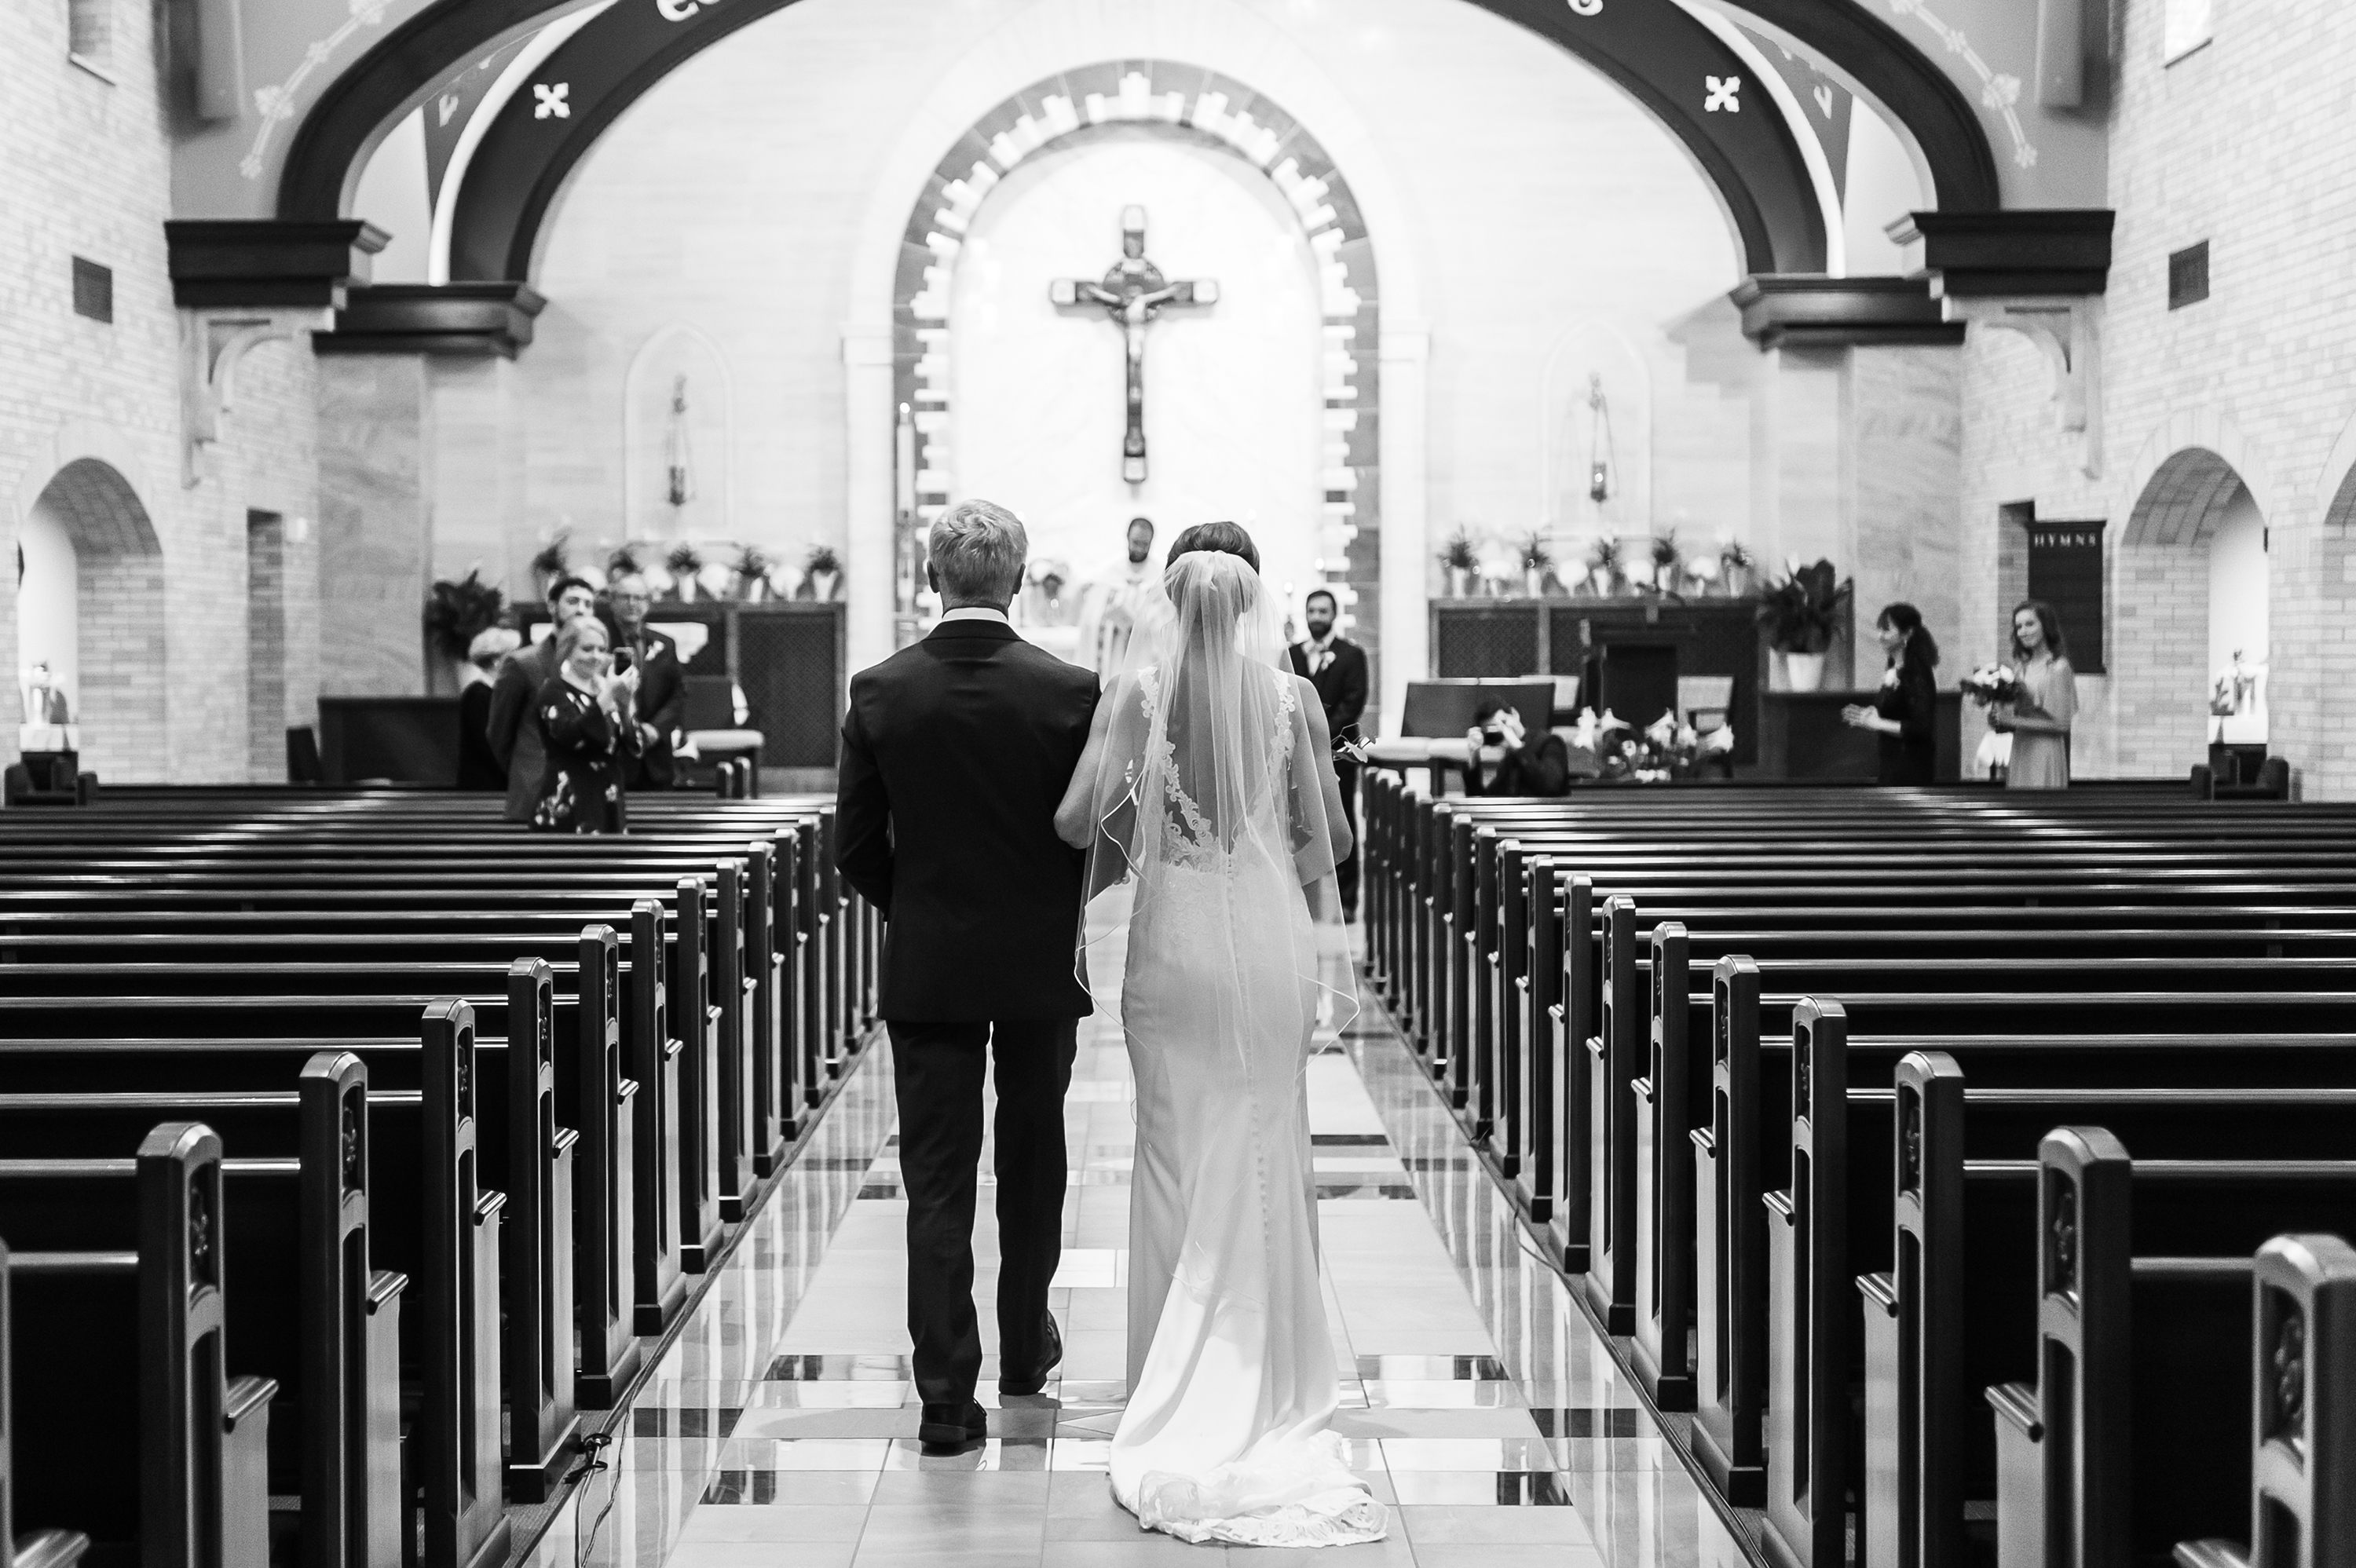 The bride walks in with her father to an empty church at Our Lady of Lourdes Catholic Church in Denver, Colorado.